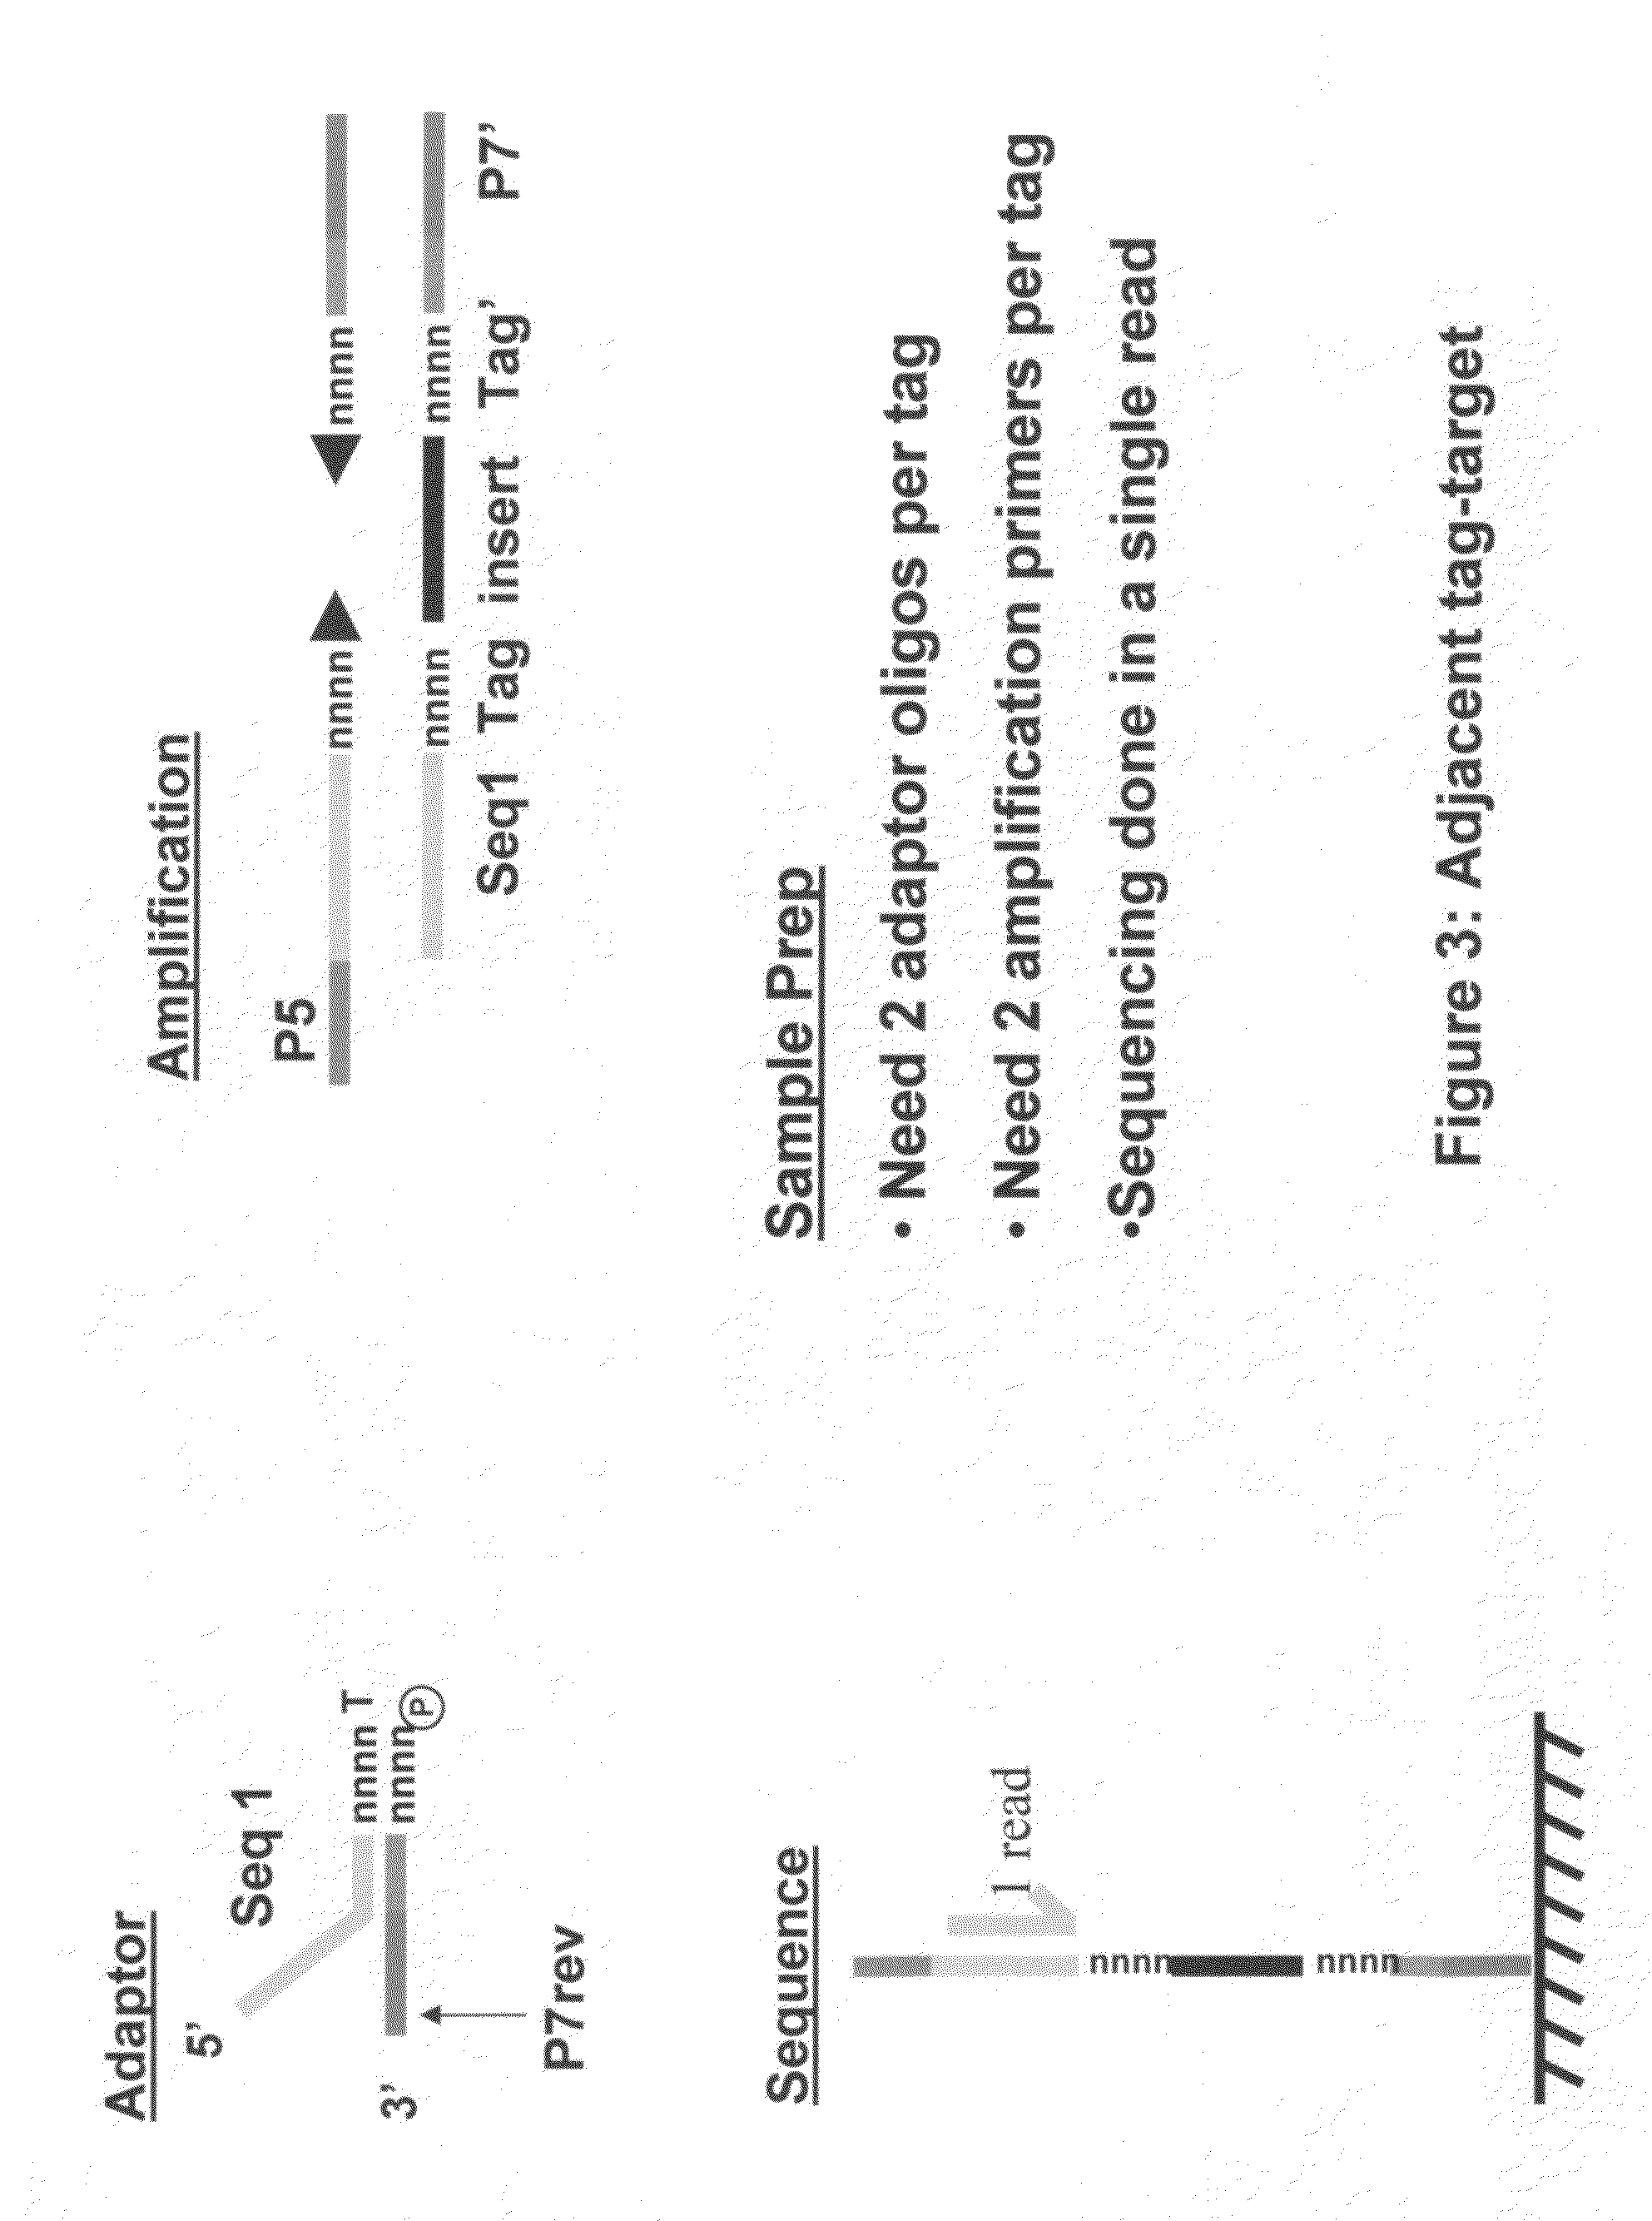 Methods for indexing samples and sequencing multiple polynucleotide templates